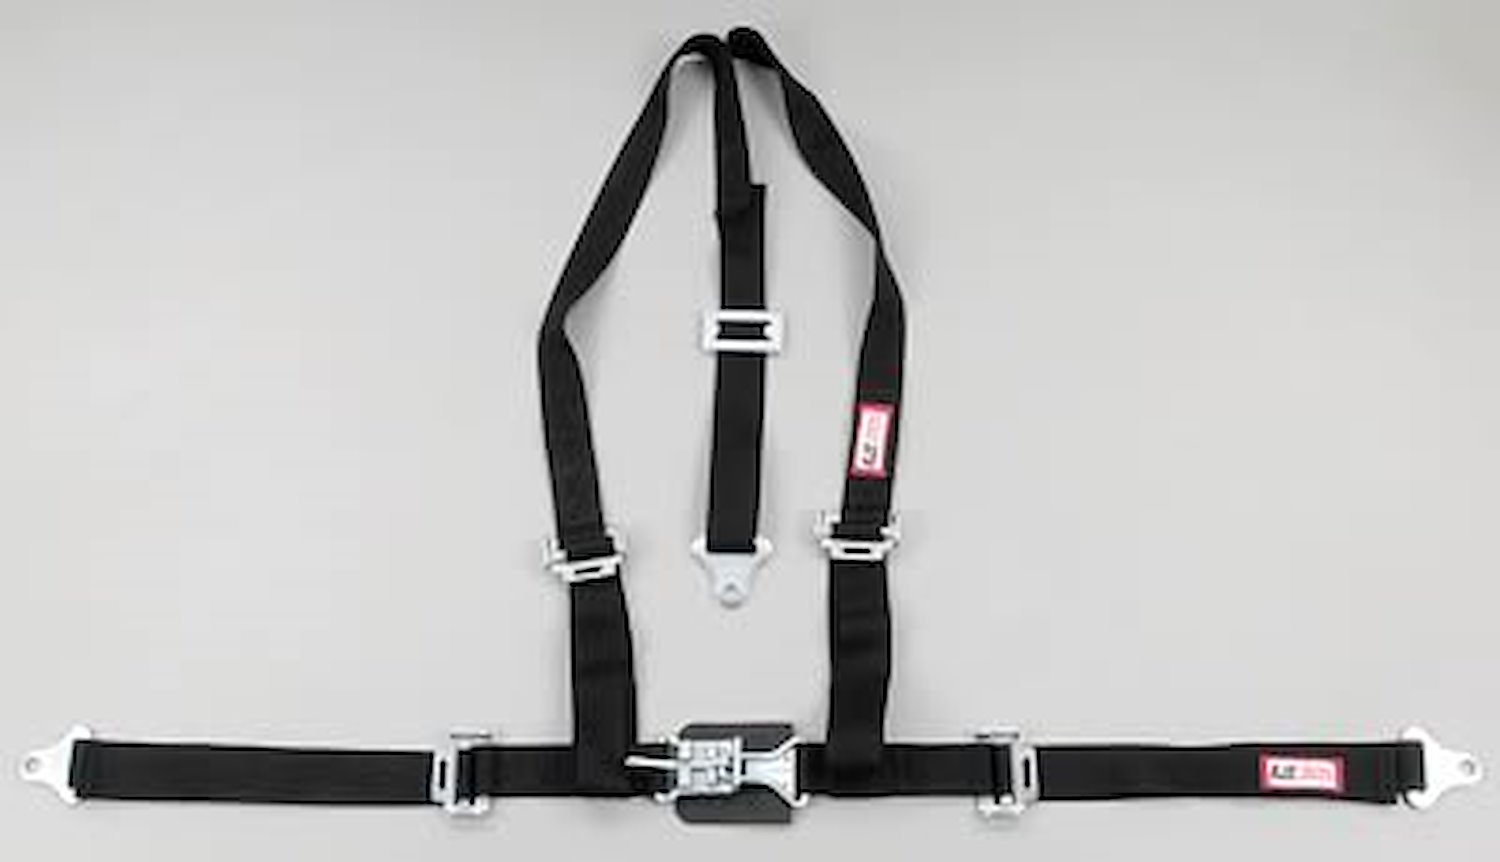 NON-SFI L&L HARNESS 2 PULL UP Lap Belt SEWN IN 2 S.H. V ROLL BAR Mount w/STERNUM STRAP ALL WRAP ENDS BLUE